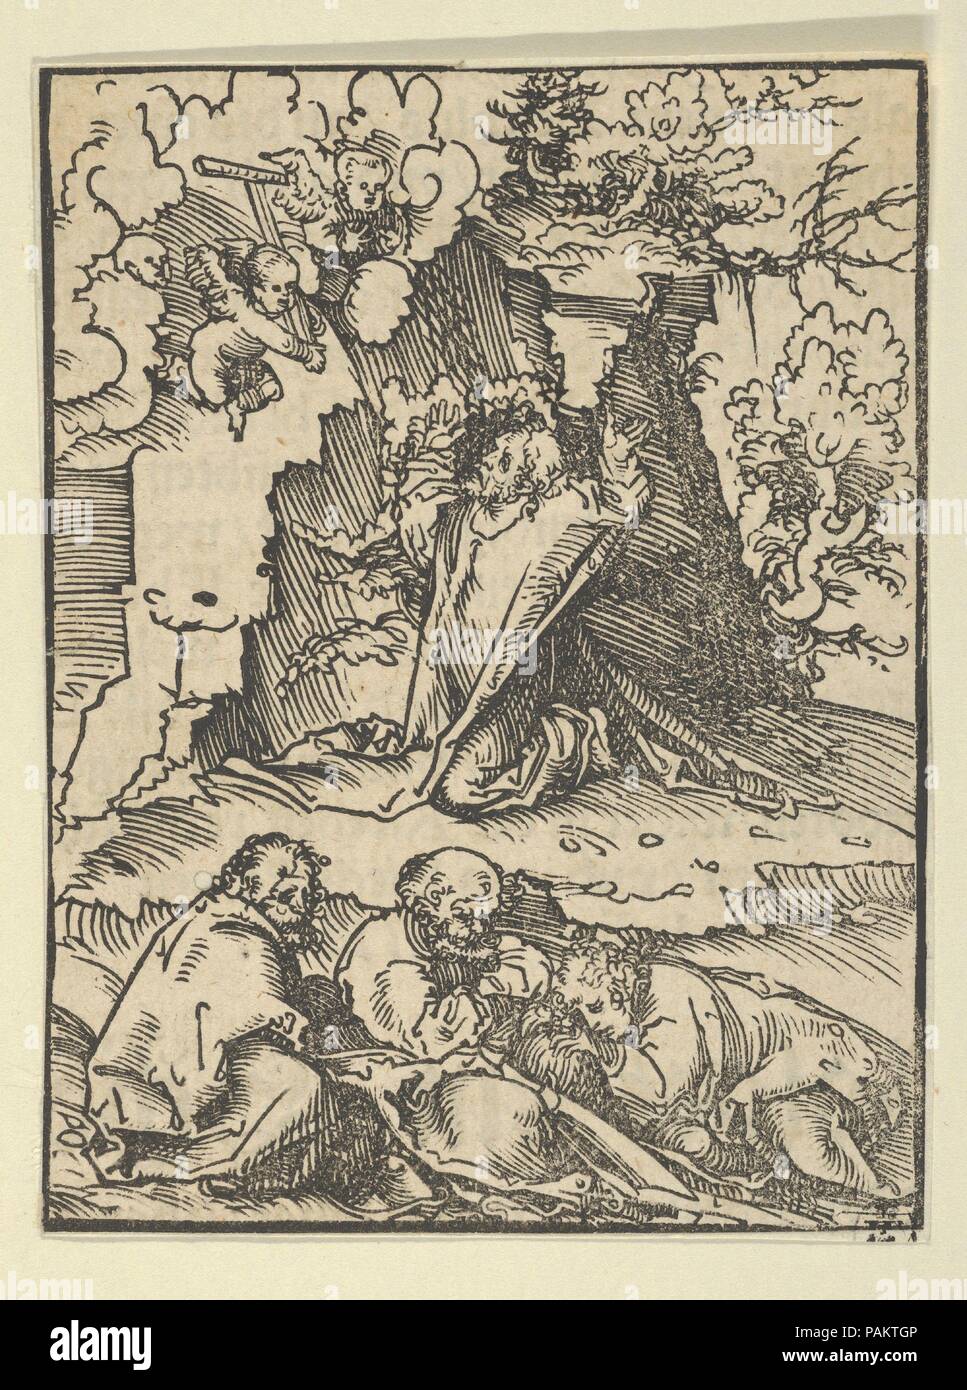 Relief with Christ on the Mount of Olives, from the Wittenberg Reliquaries. Artist: Lucas Cranach the Elder (German, Kronach 1472-1553 Weimar). Dimensions: Sheet: 4 5/16 × 3 1/4 in. (11 × 8.2 cm). Series/Portfolio: Wittenberg Reliquaries; Hortulus Animae. Museum: Metropolitan Museum of Art, New York, USA. Stock Photo